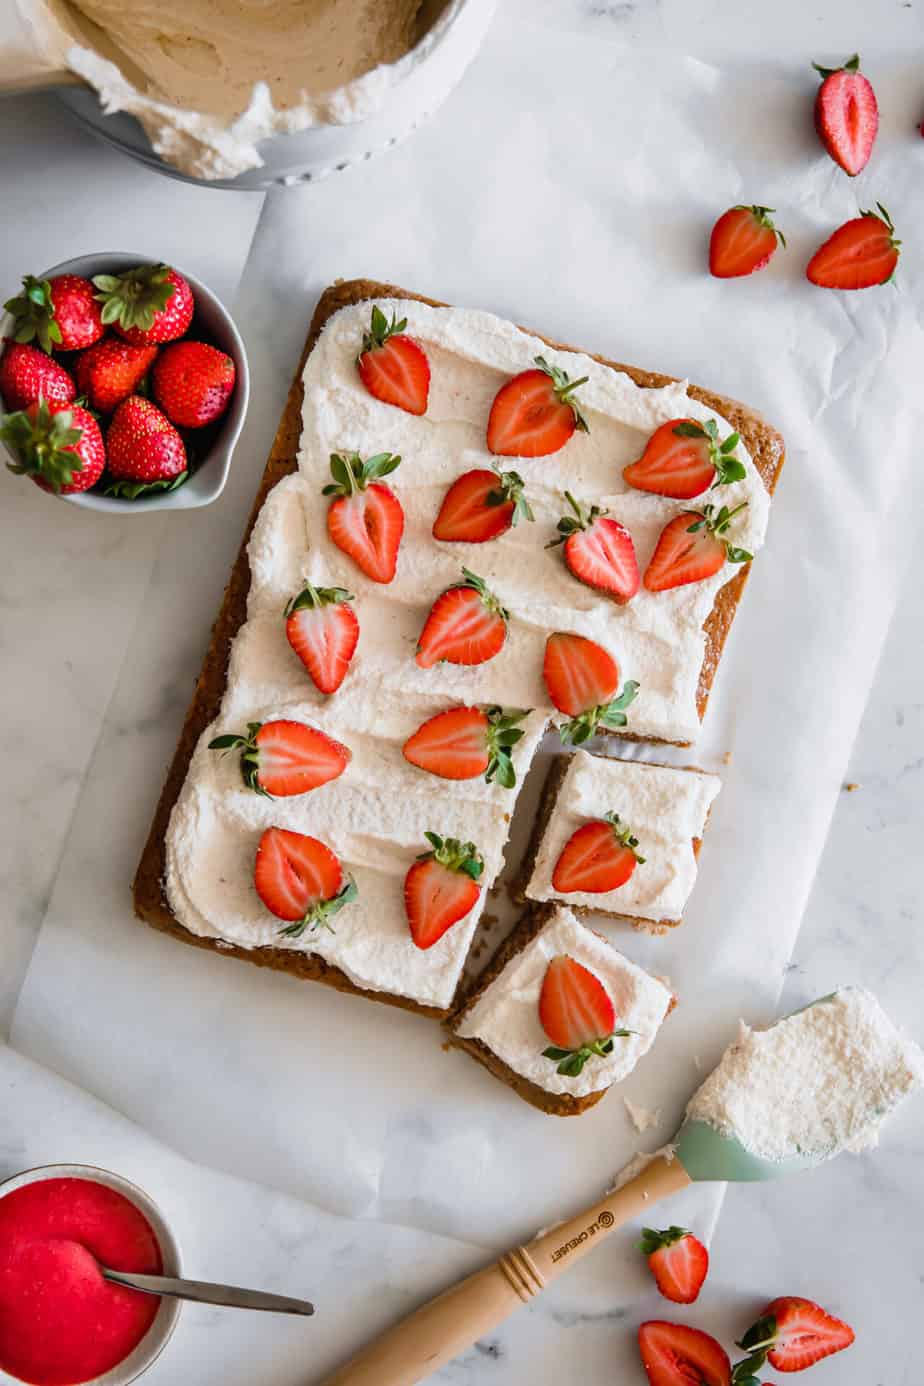 A sheet cake topped with fresh strawberries and buttercream frosting.